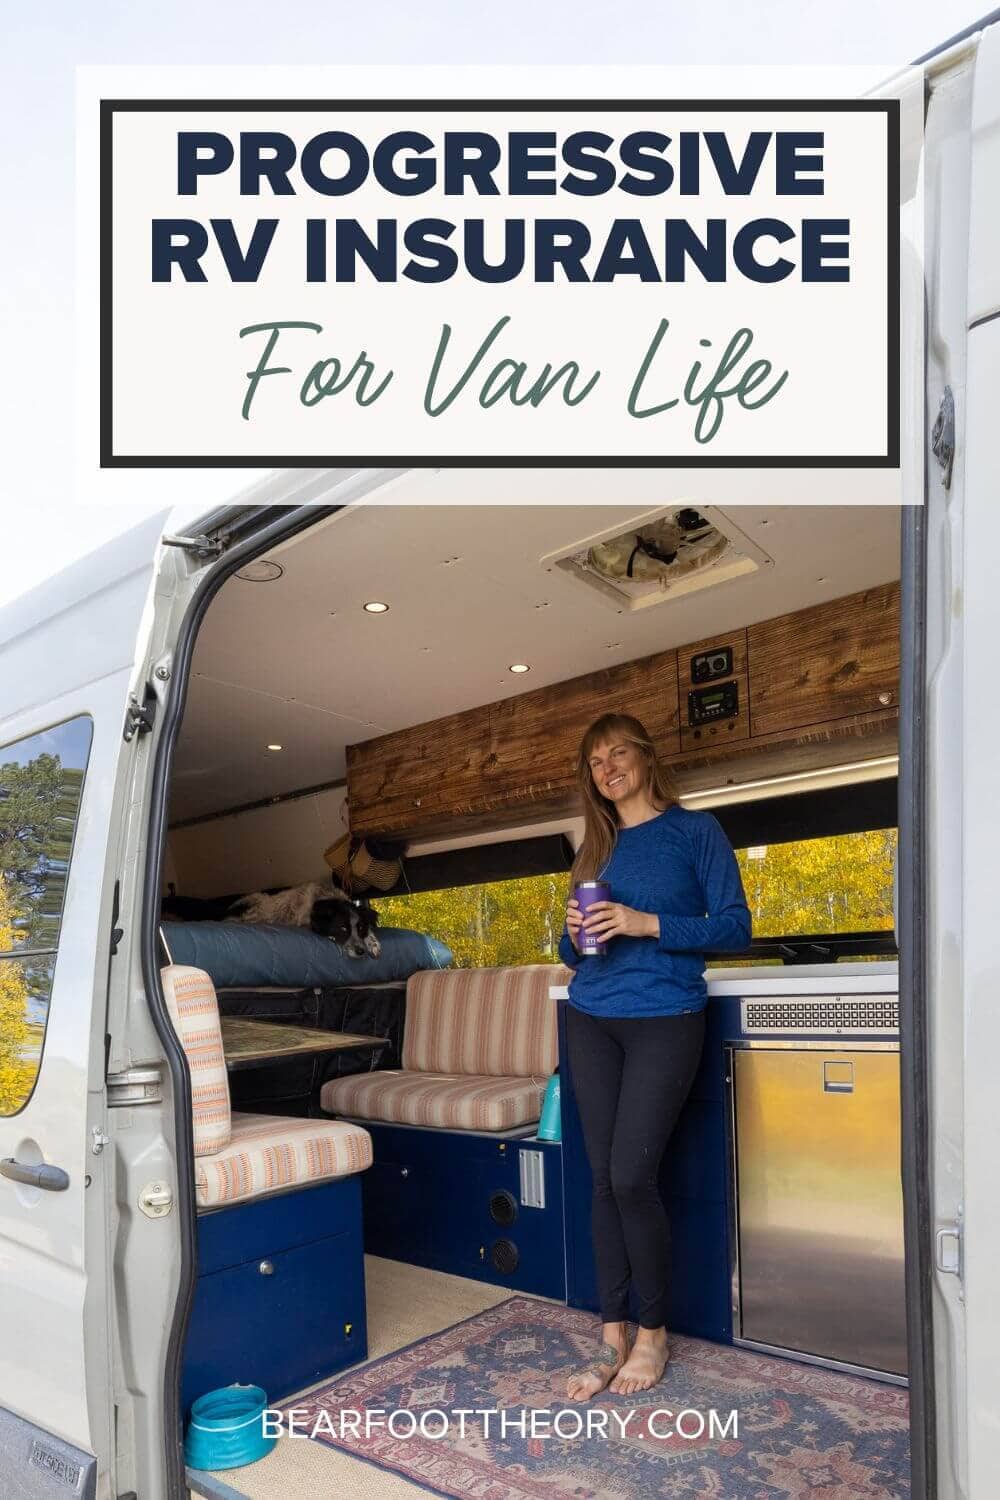 Learn about Progressive RV insurance including what vehicles are covered, different coverage options, & tips for insuring your camper van.